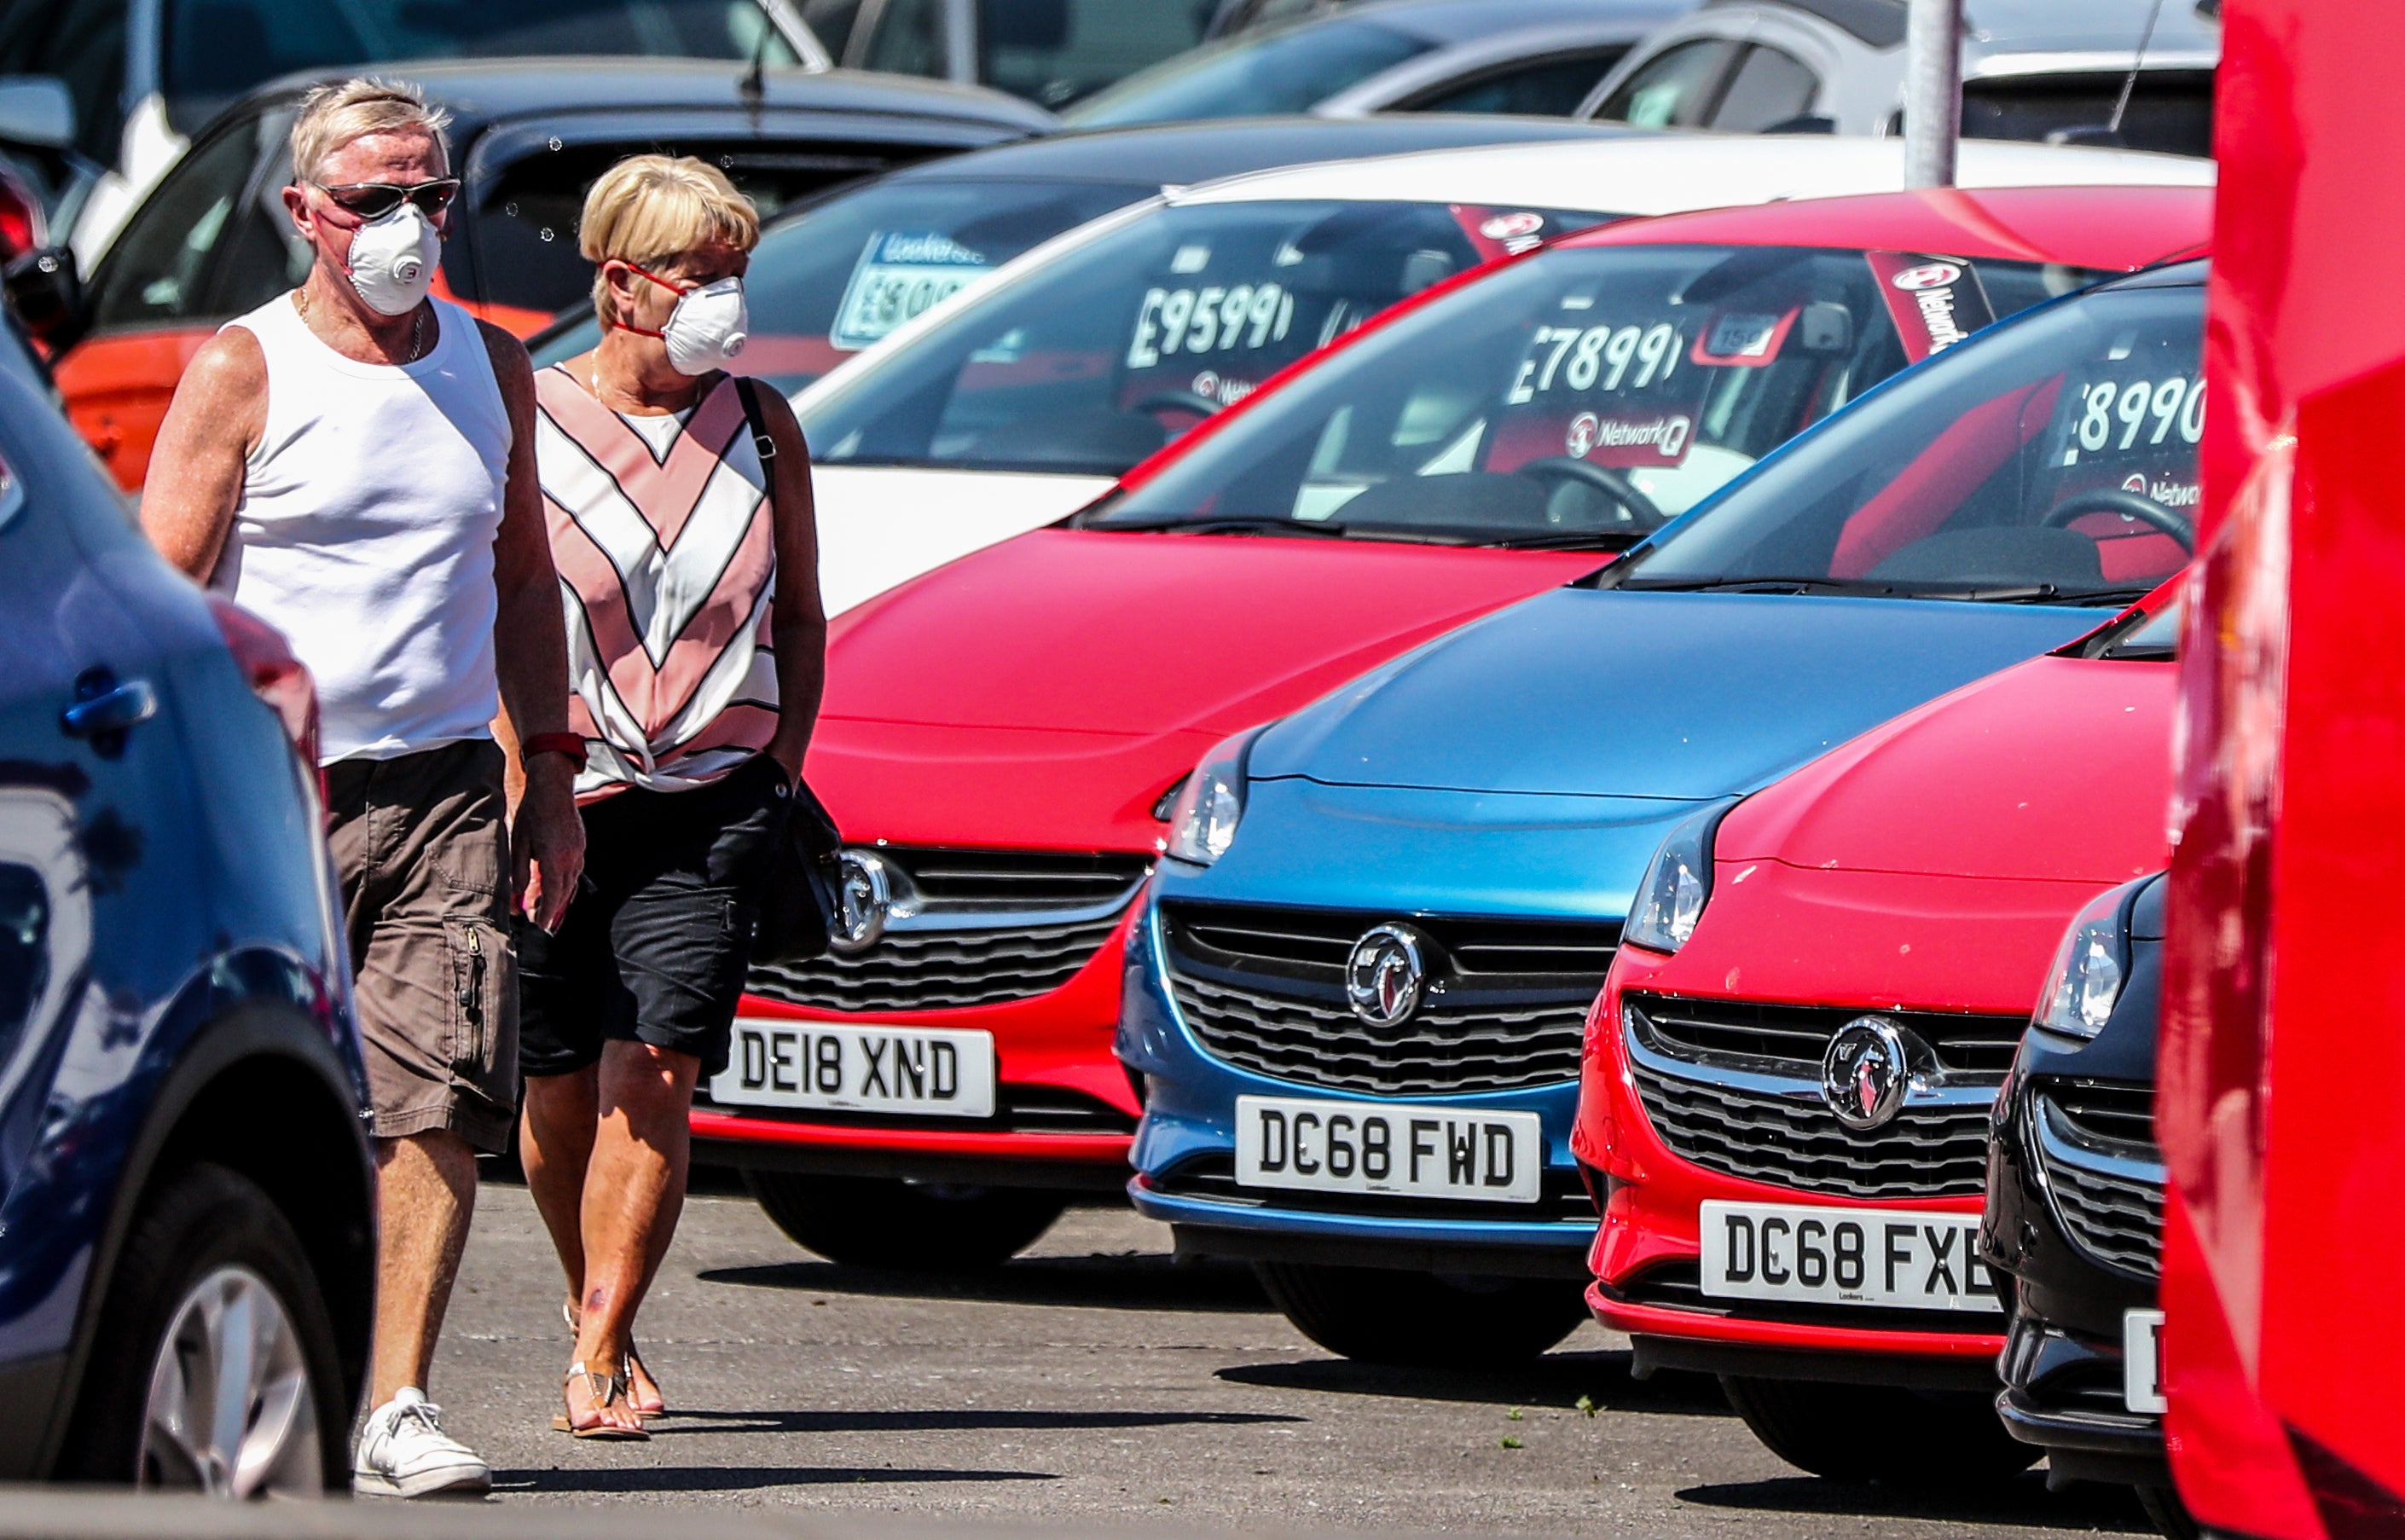 The car dealership said it would pay back £1.5 million of business rates relief to the Government (Peter Byrne/PA)